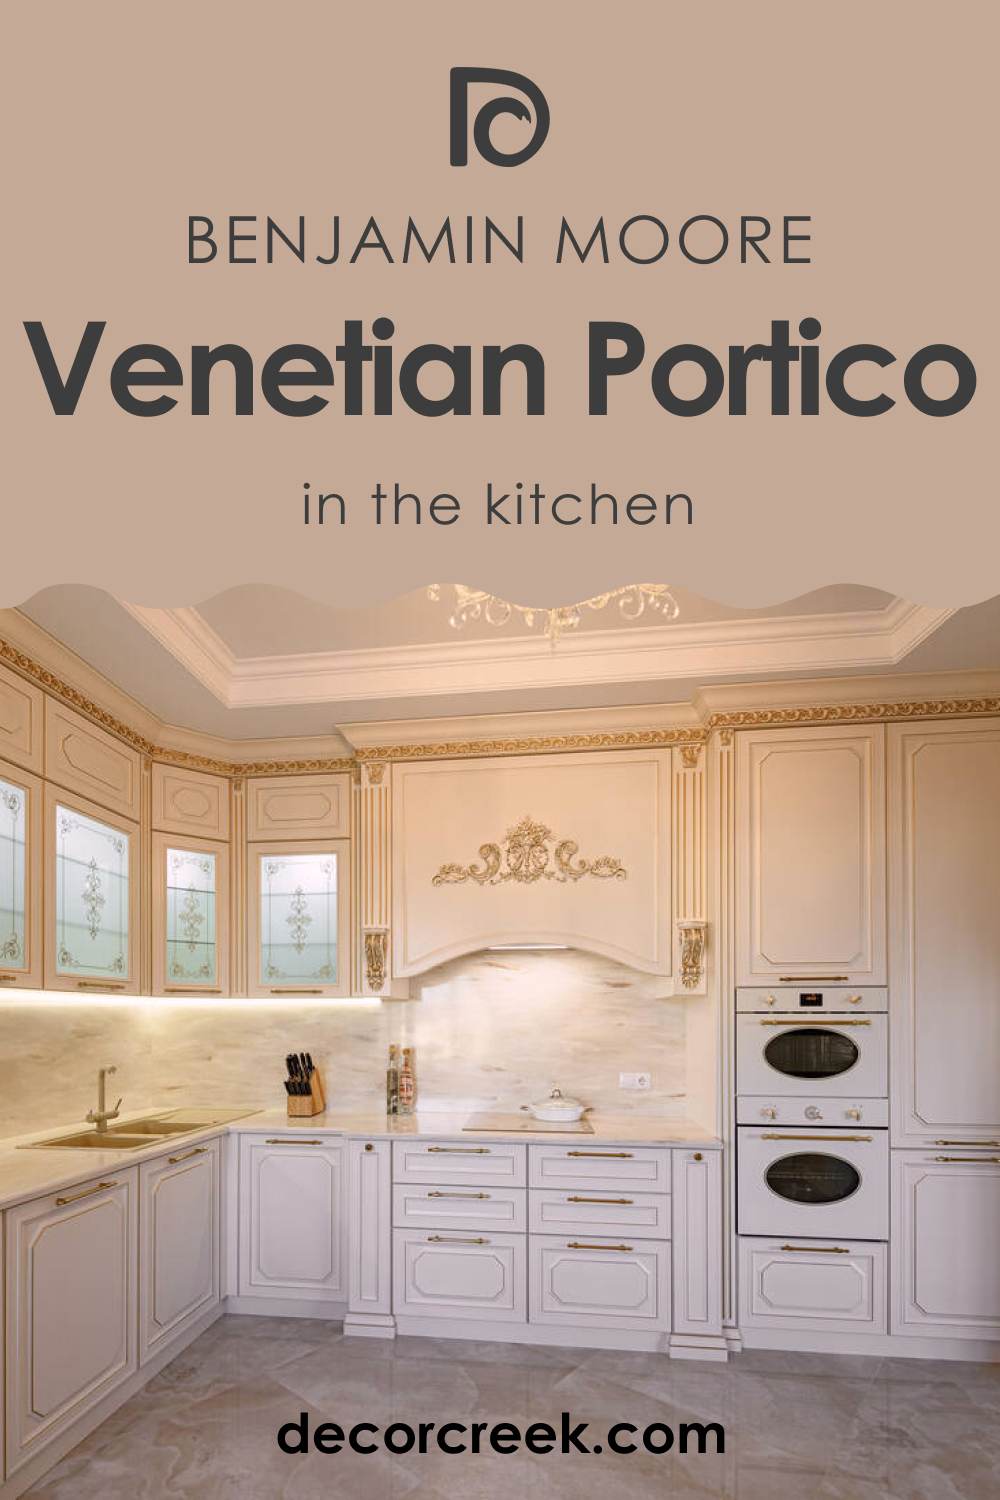 How to Use Venetian Portico AF-185 in the Kitchen?